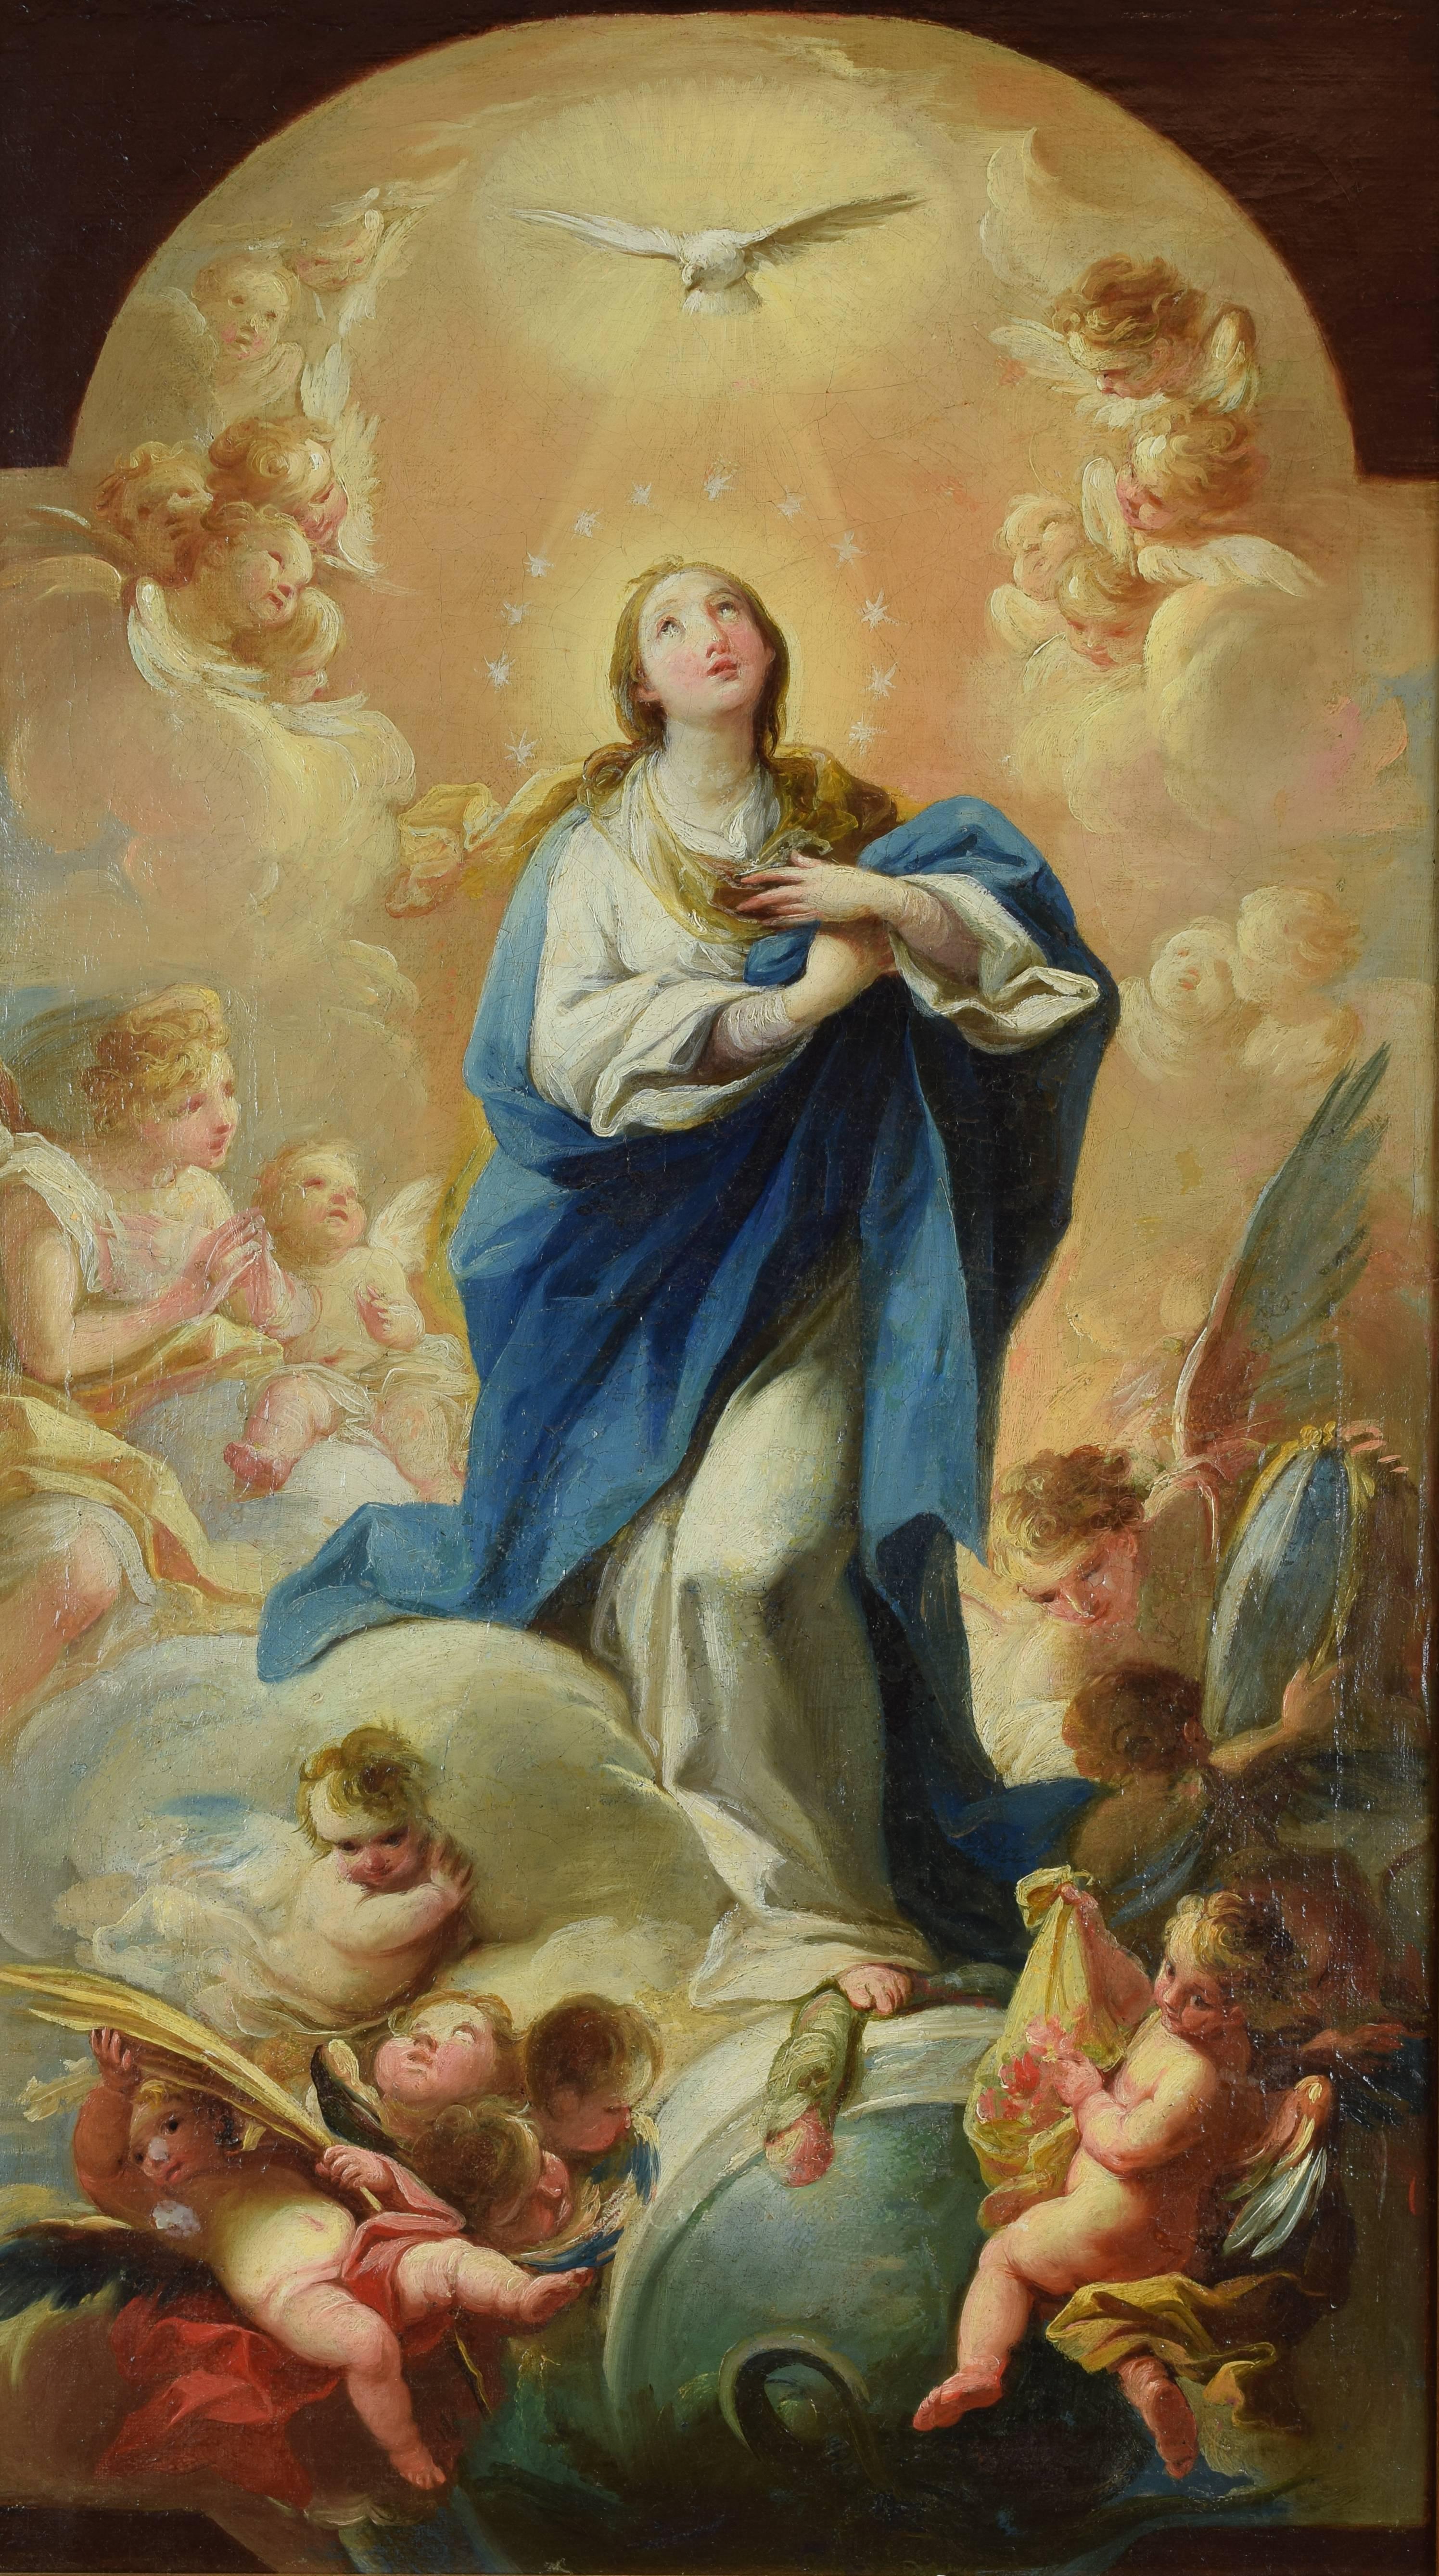 "Immaculate Conception". Oil on canvas. Maella, Mariano Salvador (Valencia, 1739-Madrid, 1819).
The iconography followed in this painting is the usual in the theme of the Immaculate, already very popular in the Spanish Baroque. Along with